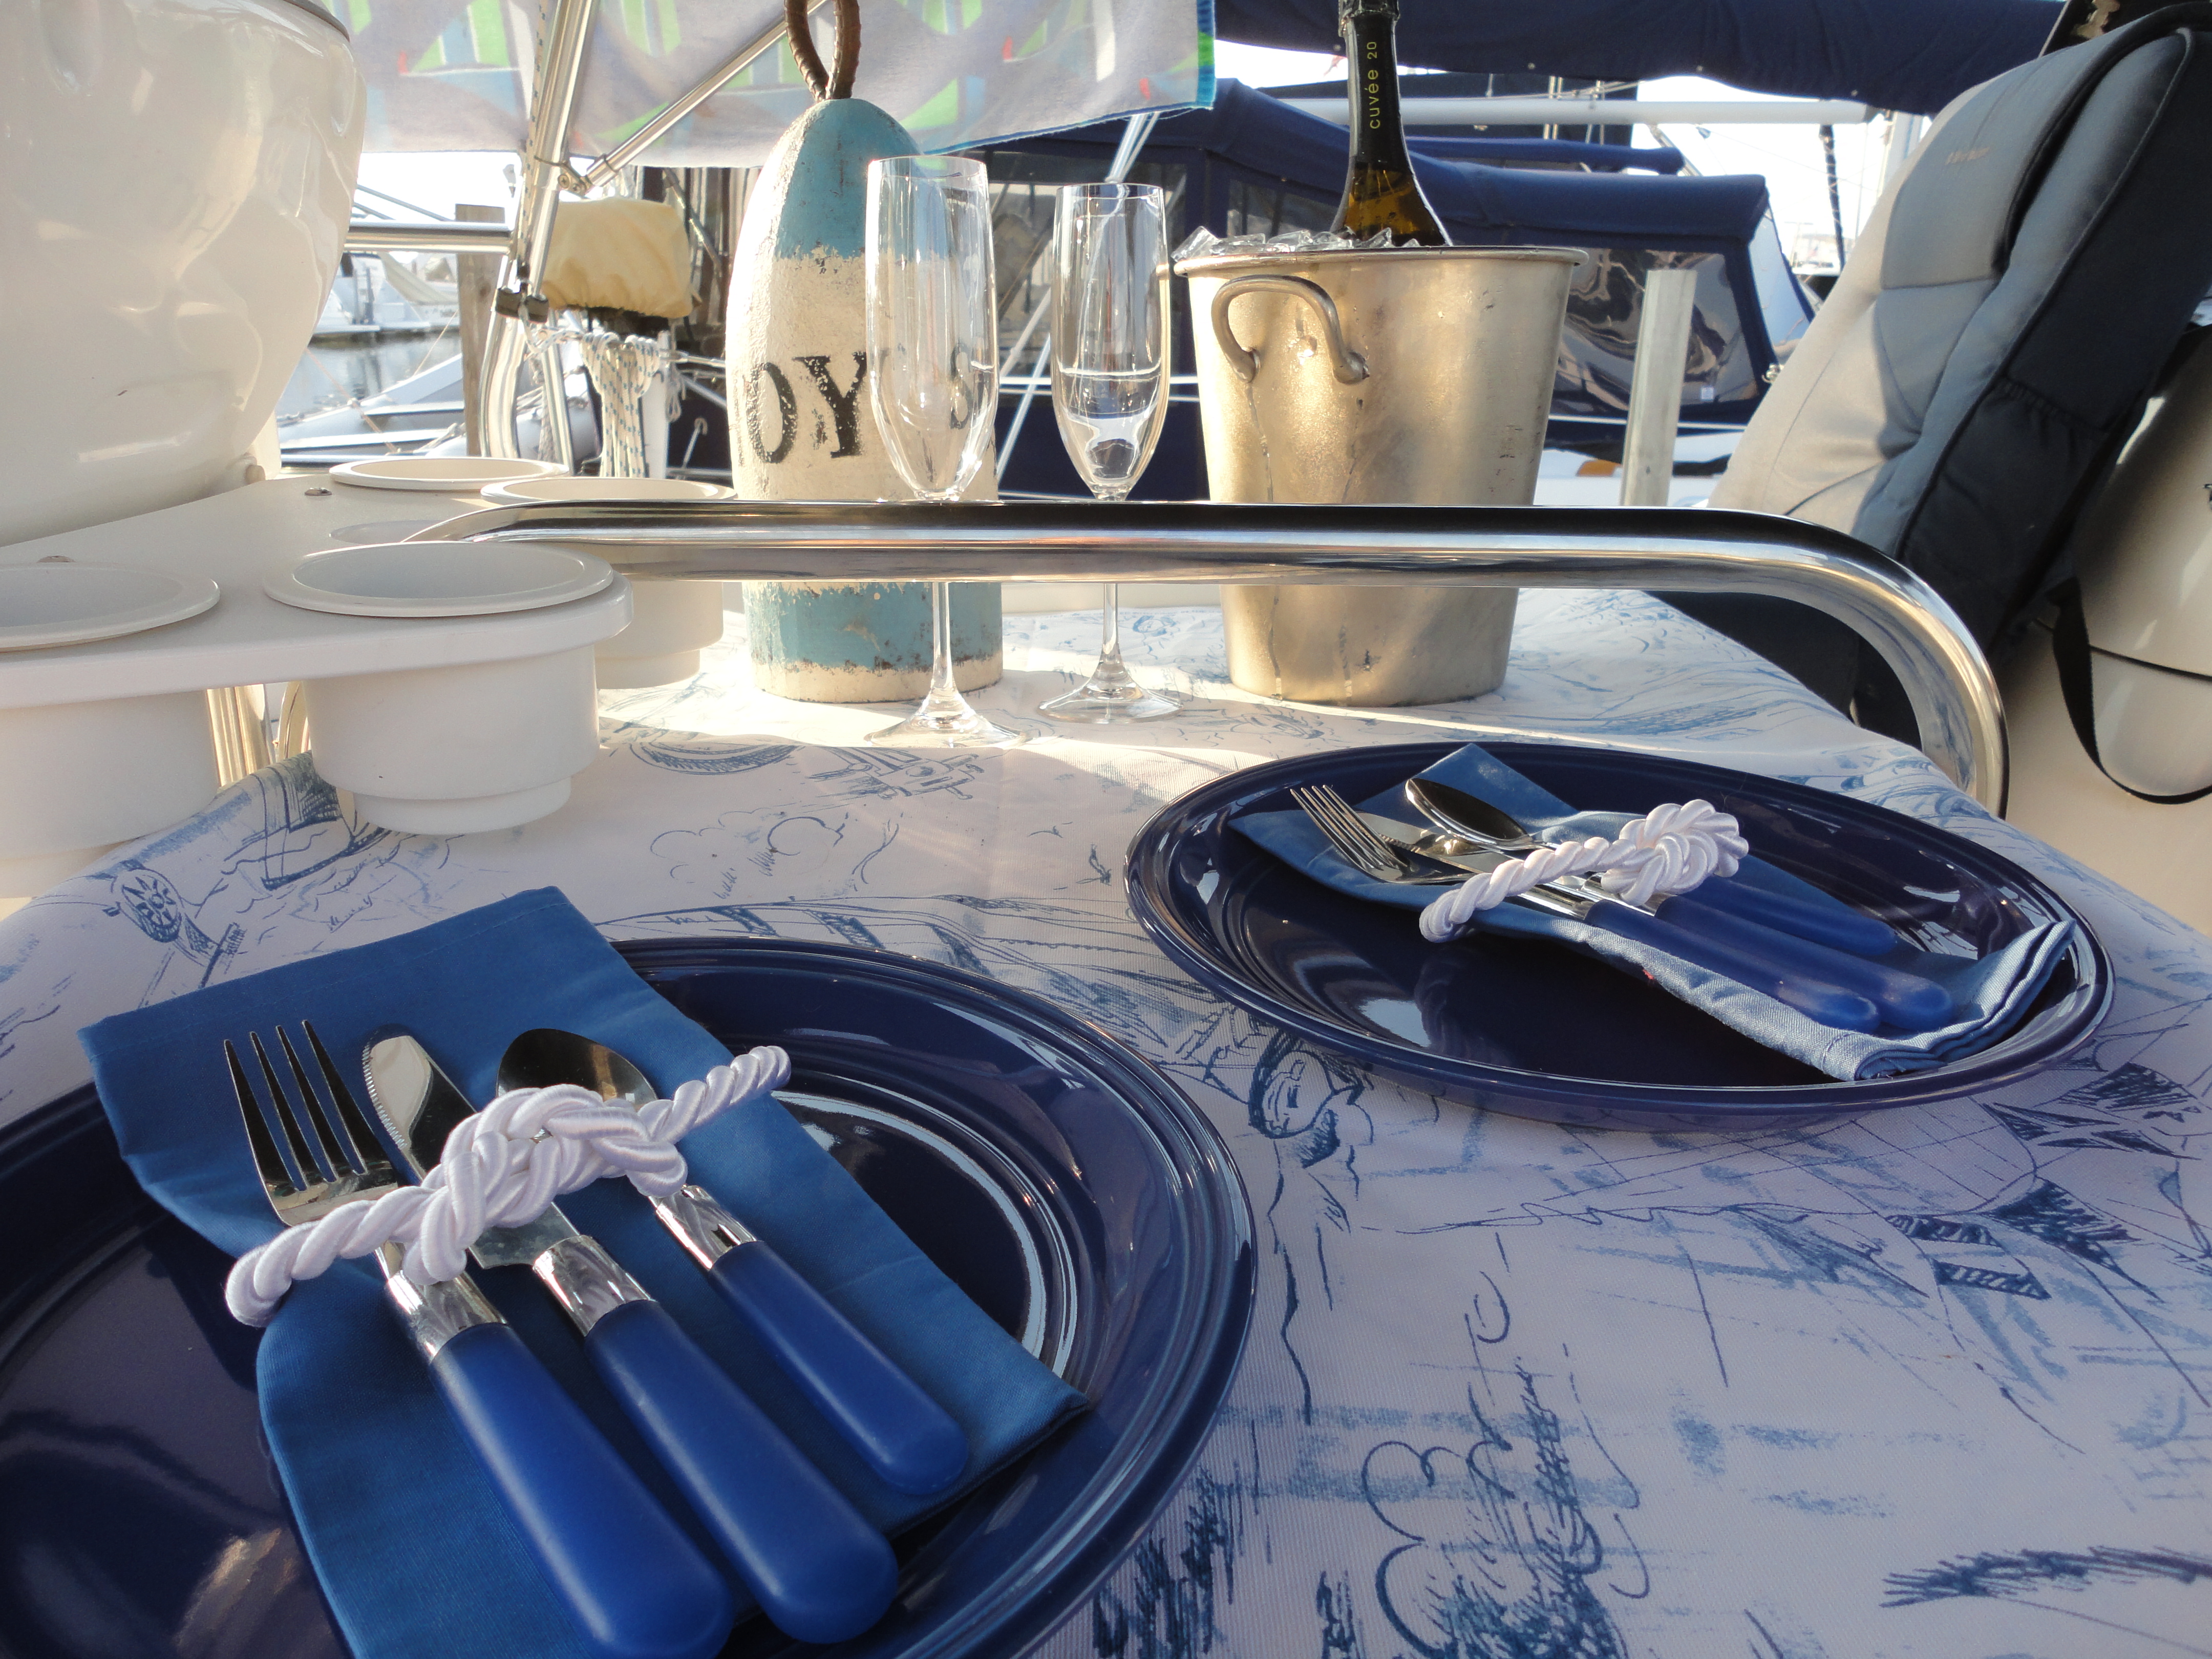 Table set for dinner on the back of the sailboat, with champagne chilling.